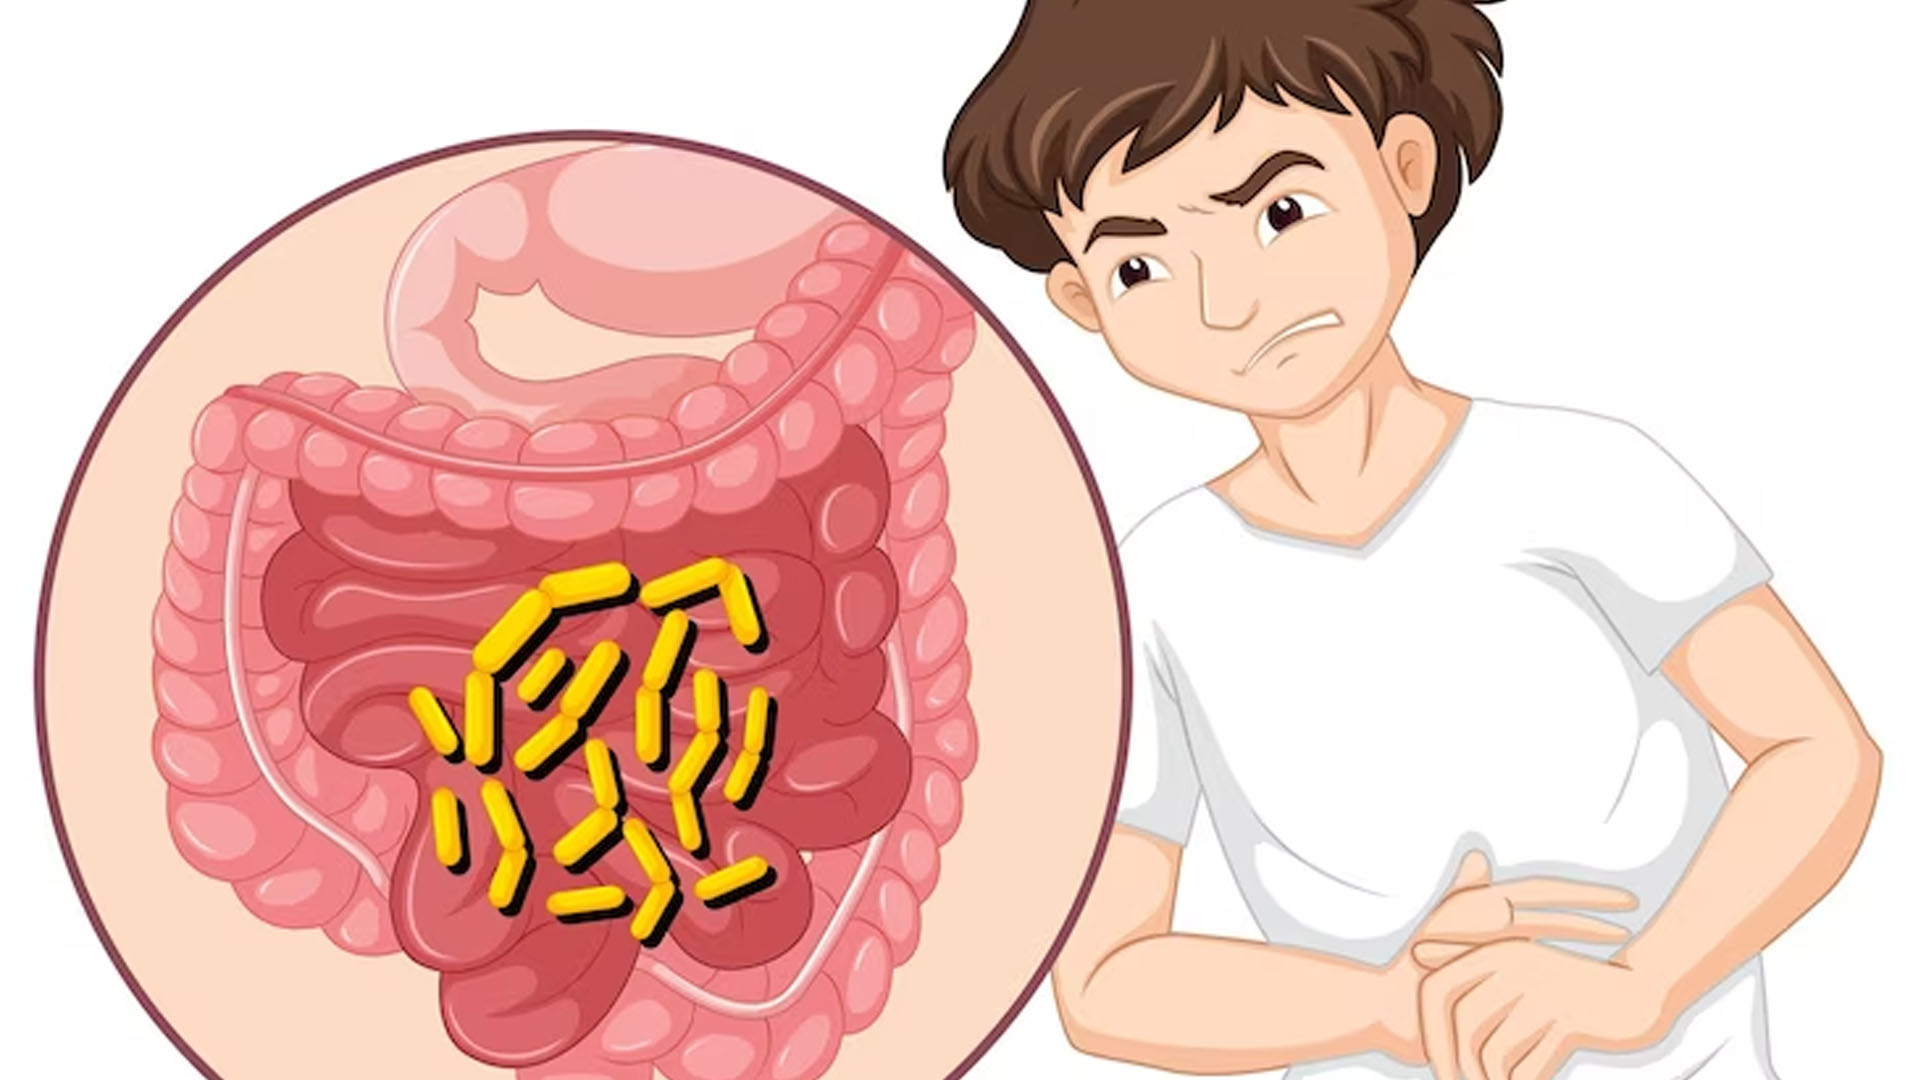 What are the Symptoms of Worms in Stomach?